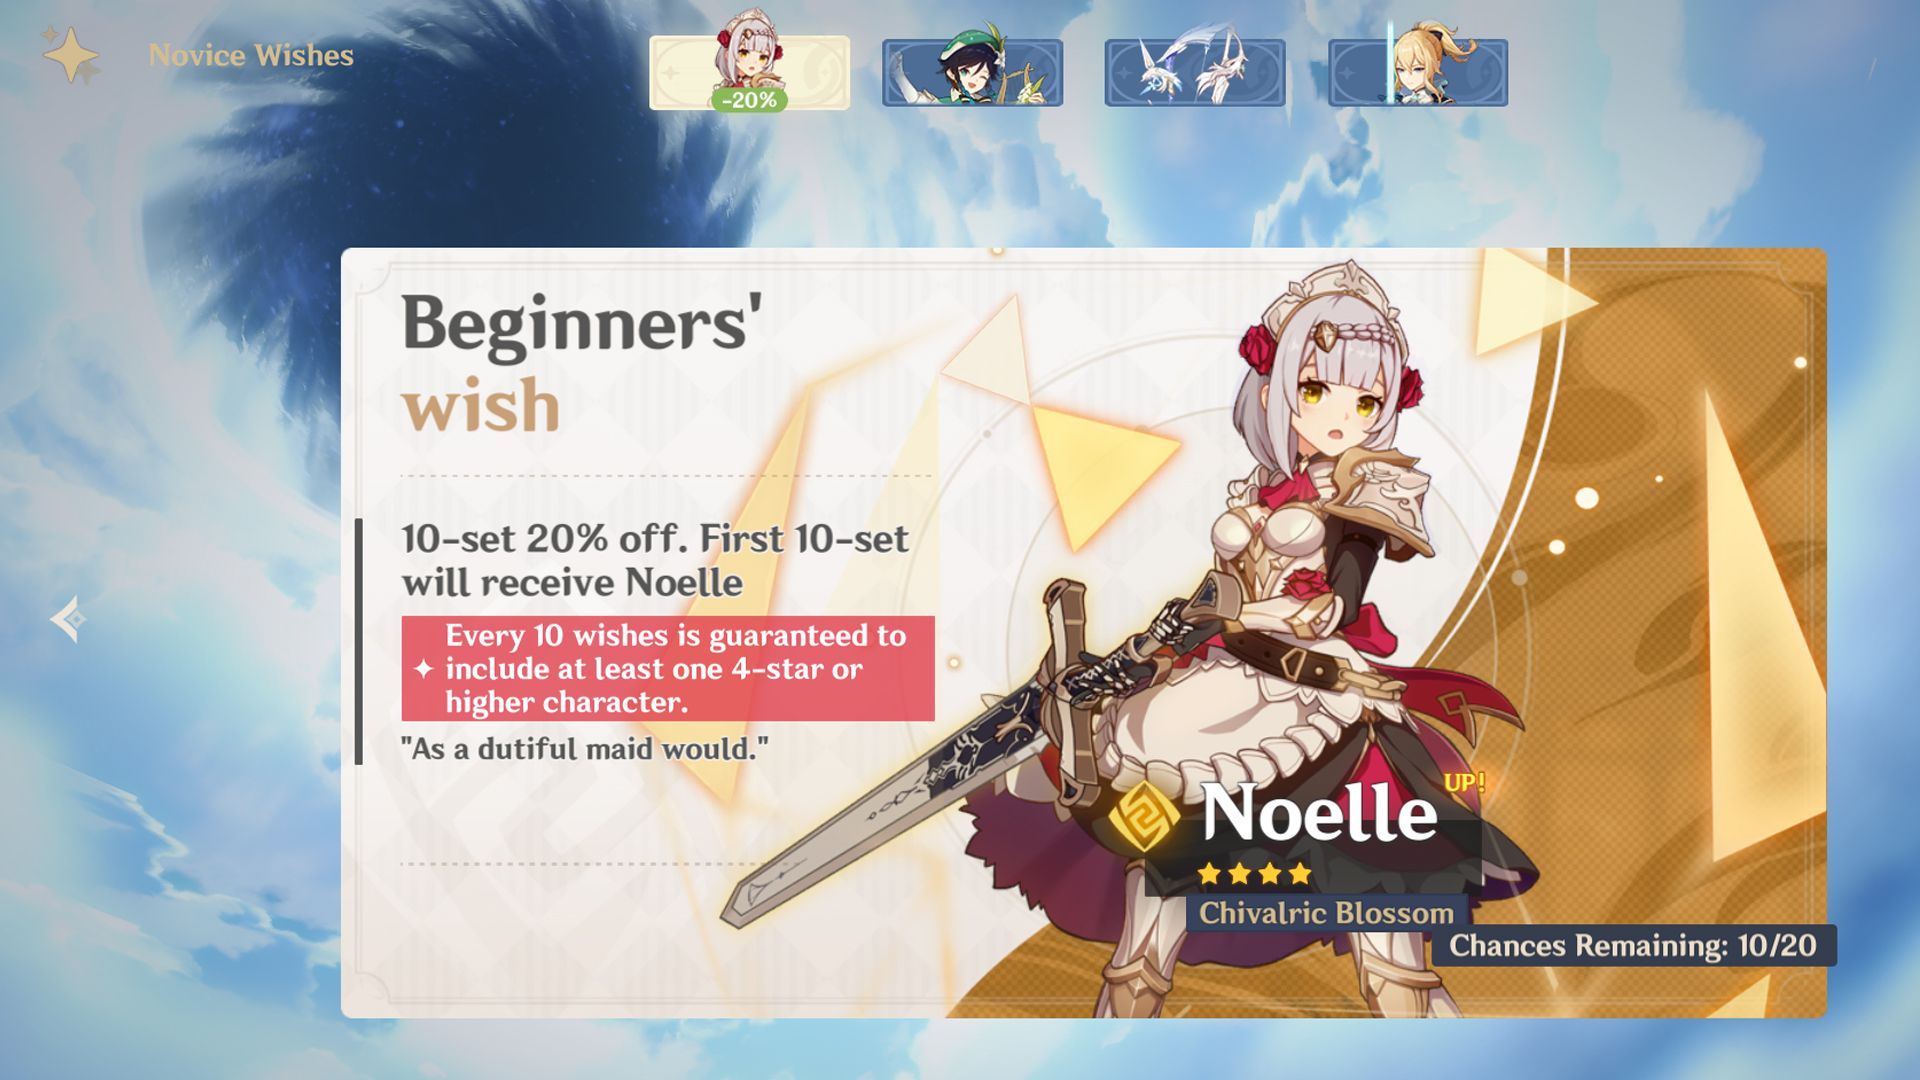 Genshin Impact Screen Showing The Beginners' Wish Banner Featuring Noelle